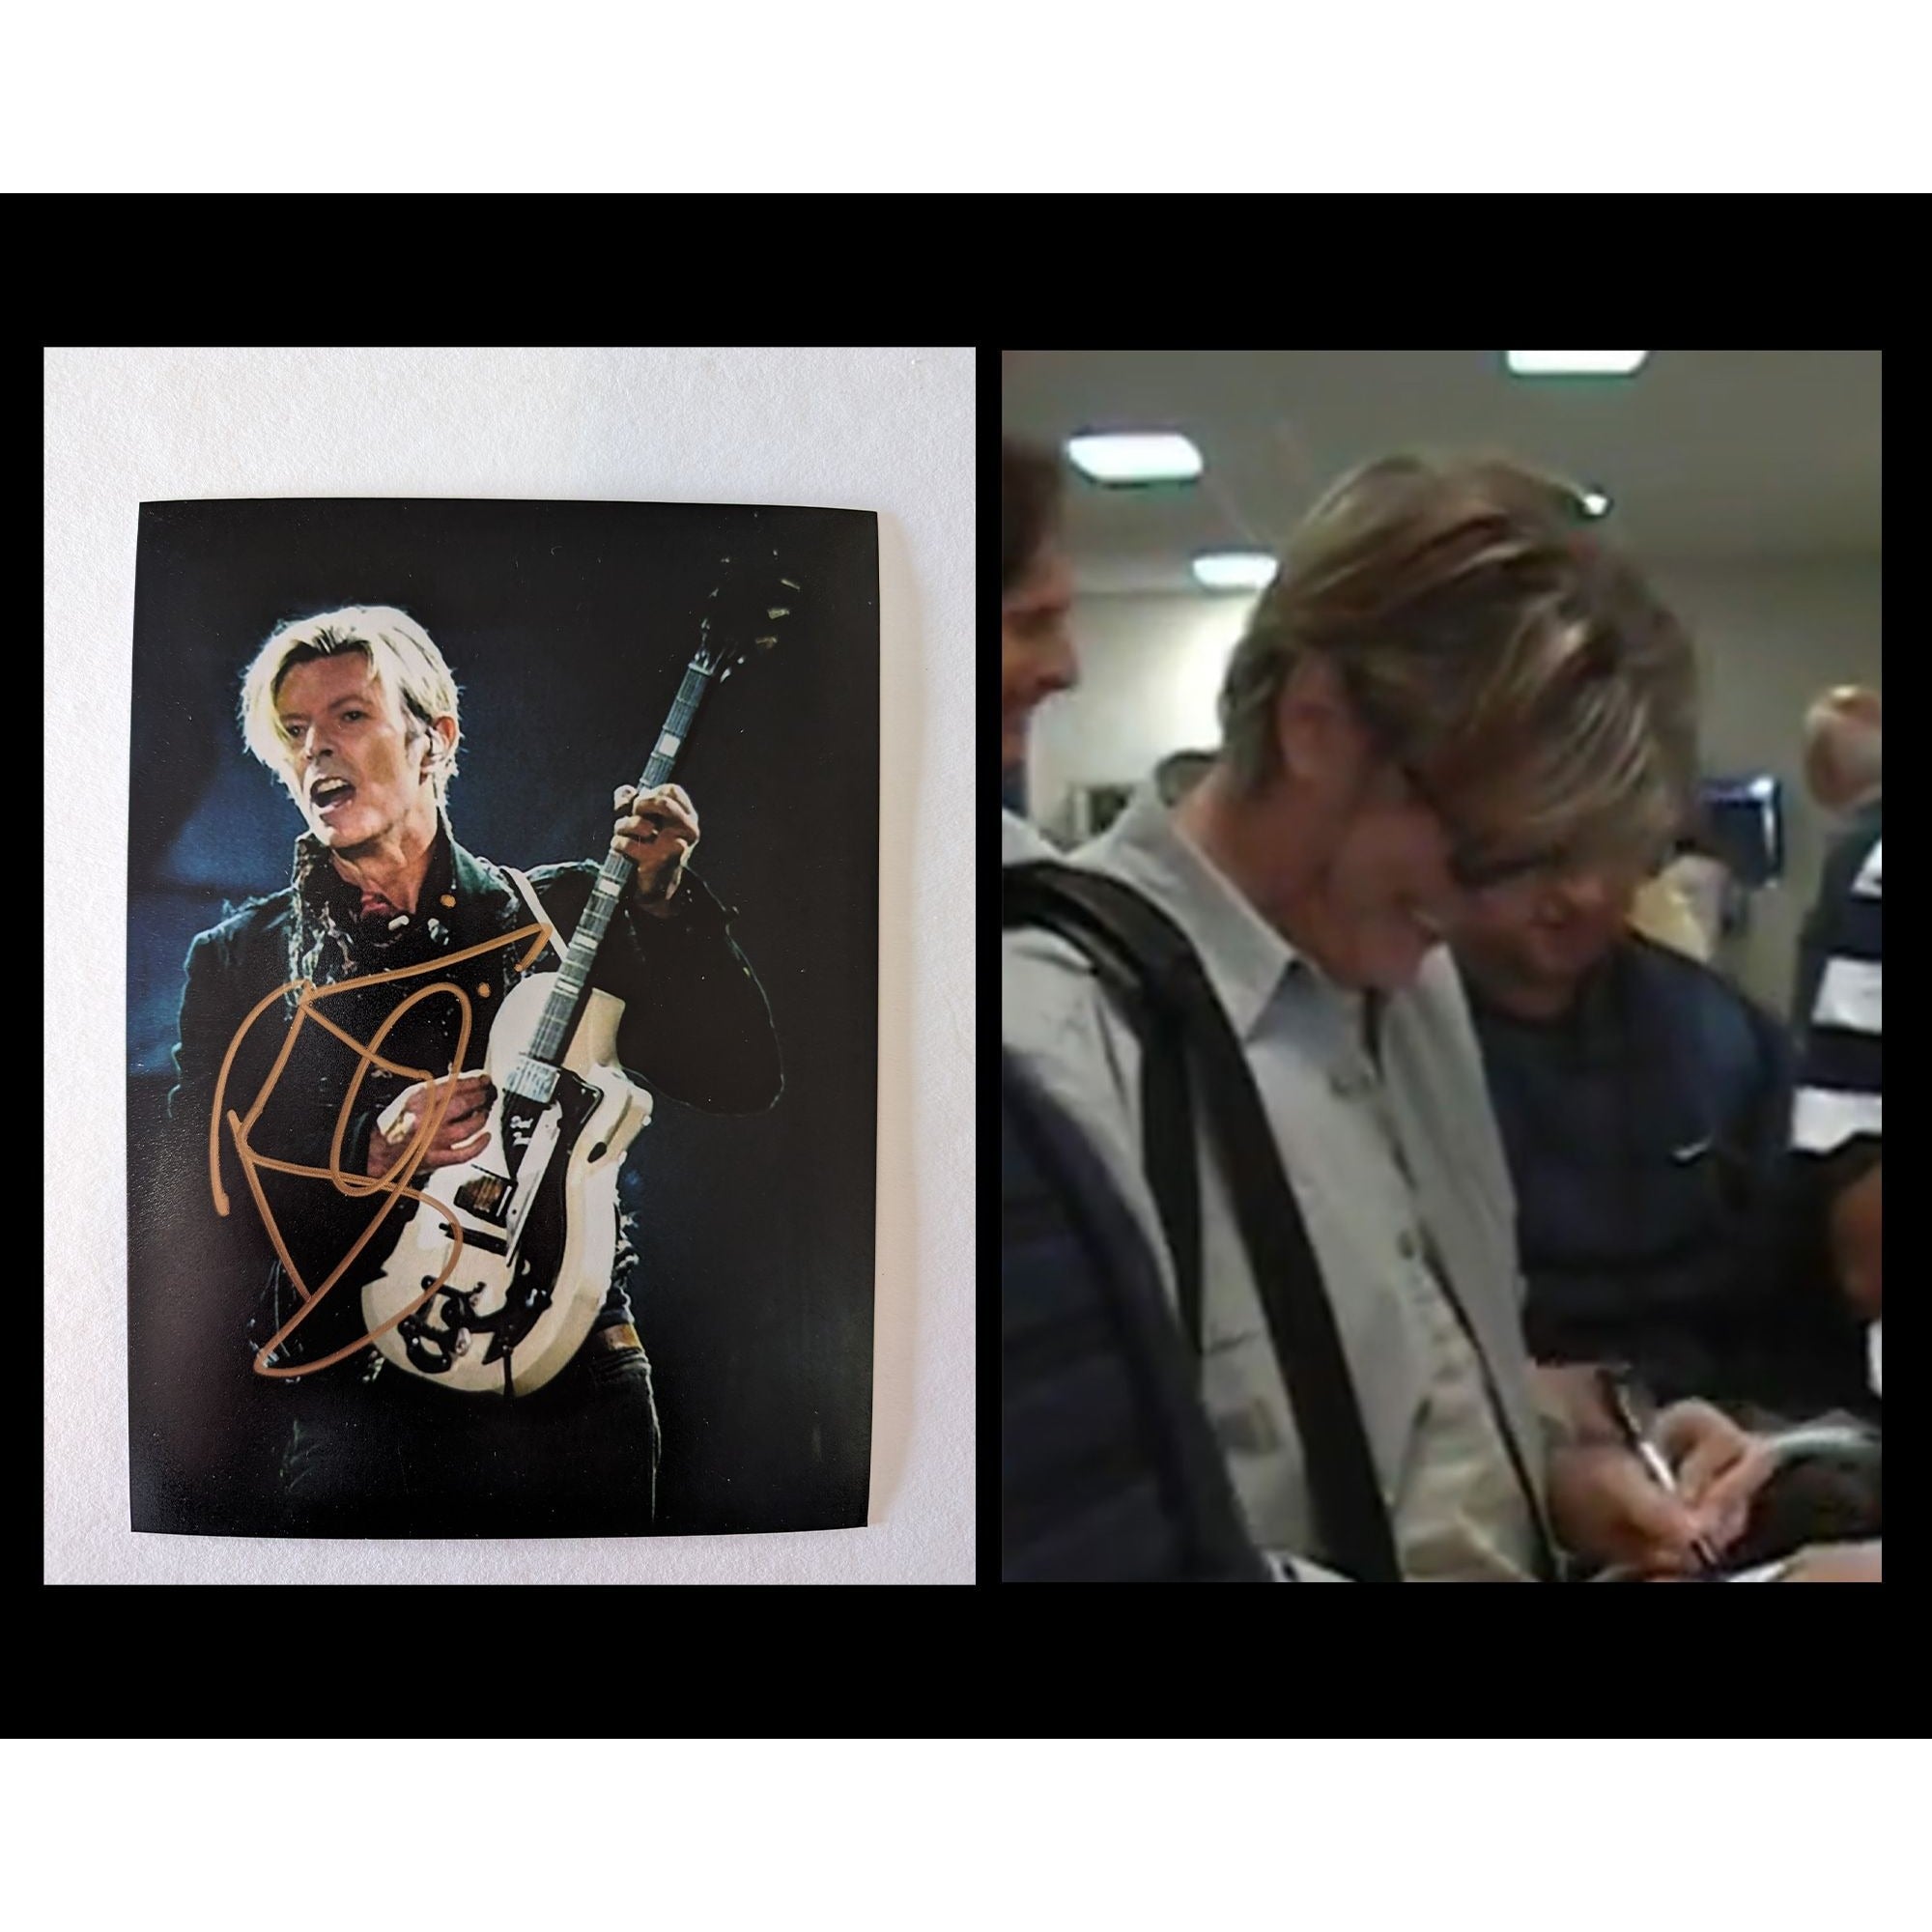 David Bowie 5x7 photograph signed with proof